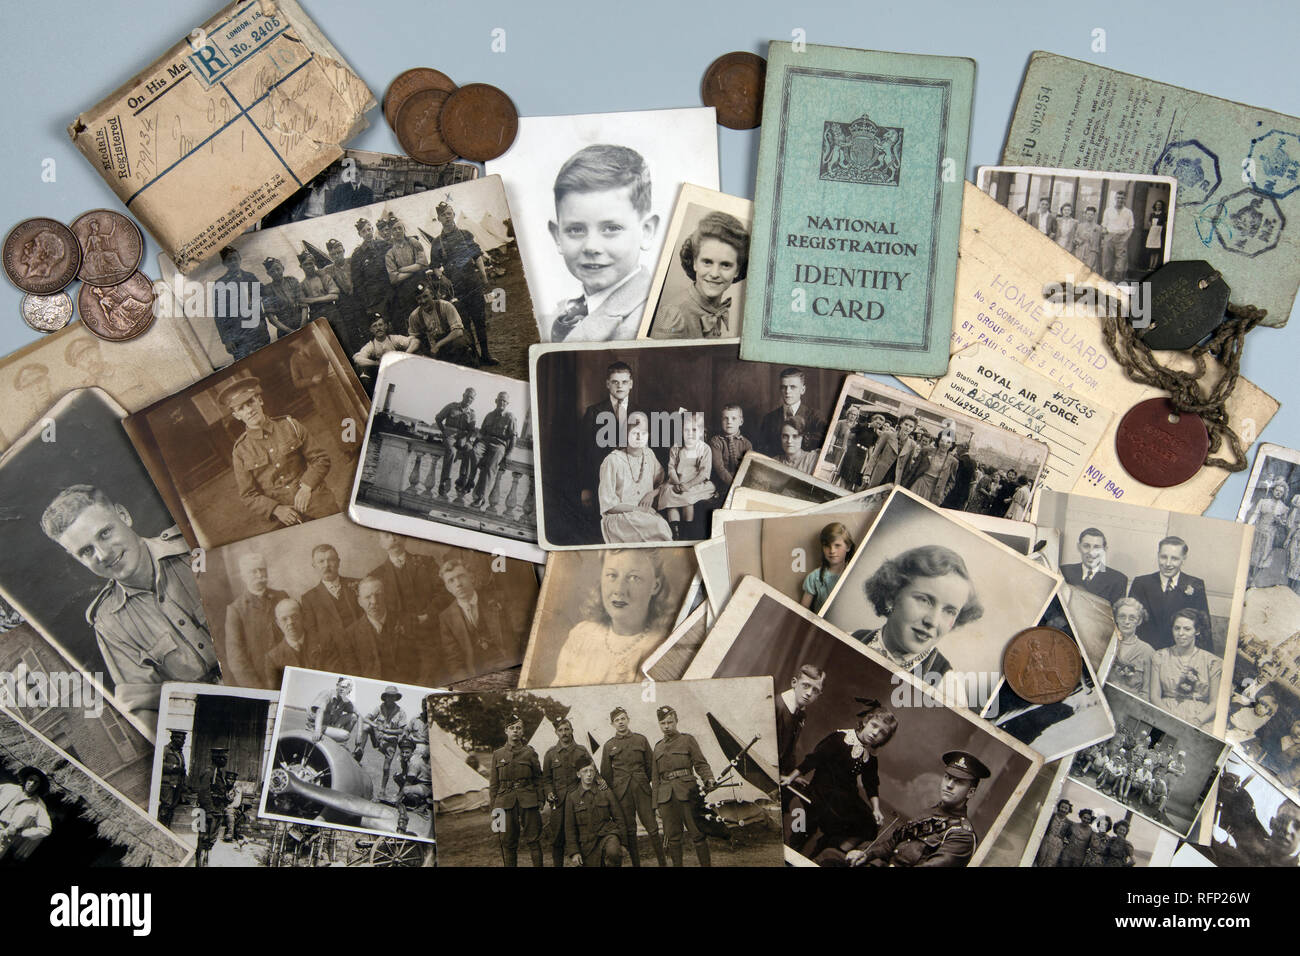 Genealogy - Family History - Old family photographs dating from around 1890 up to about 1950. Stock Photo